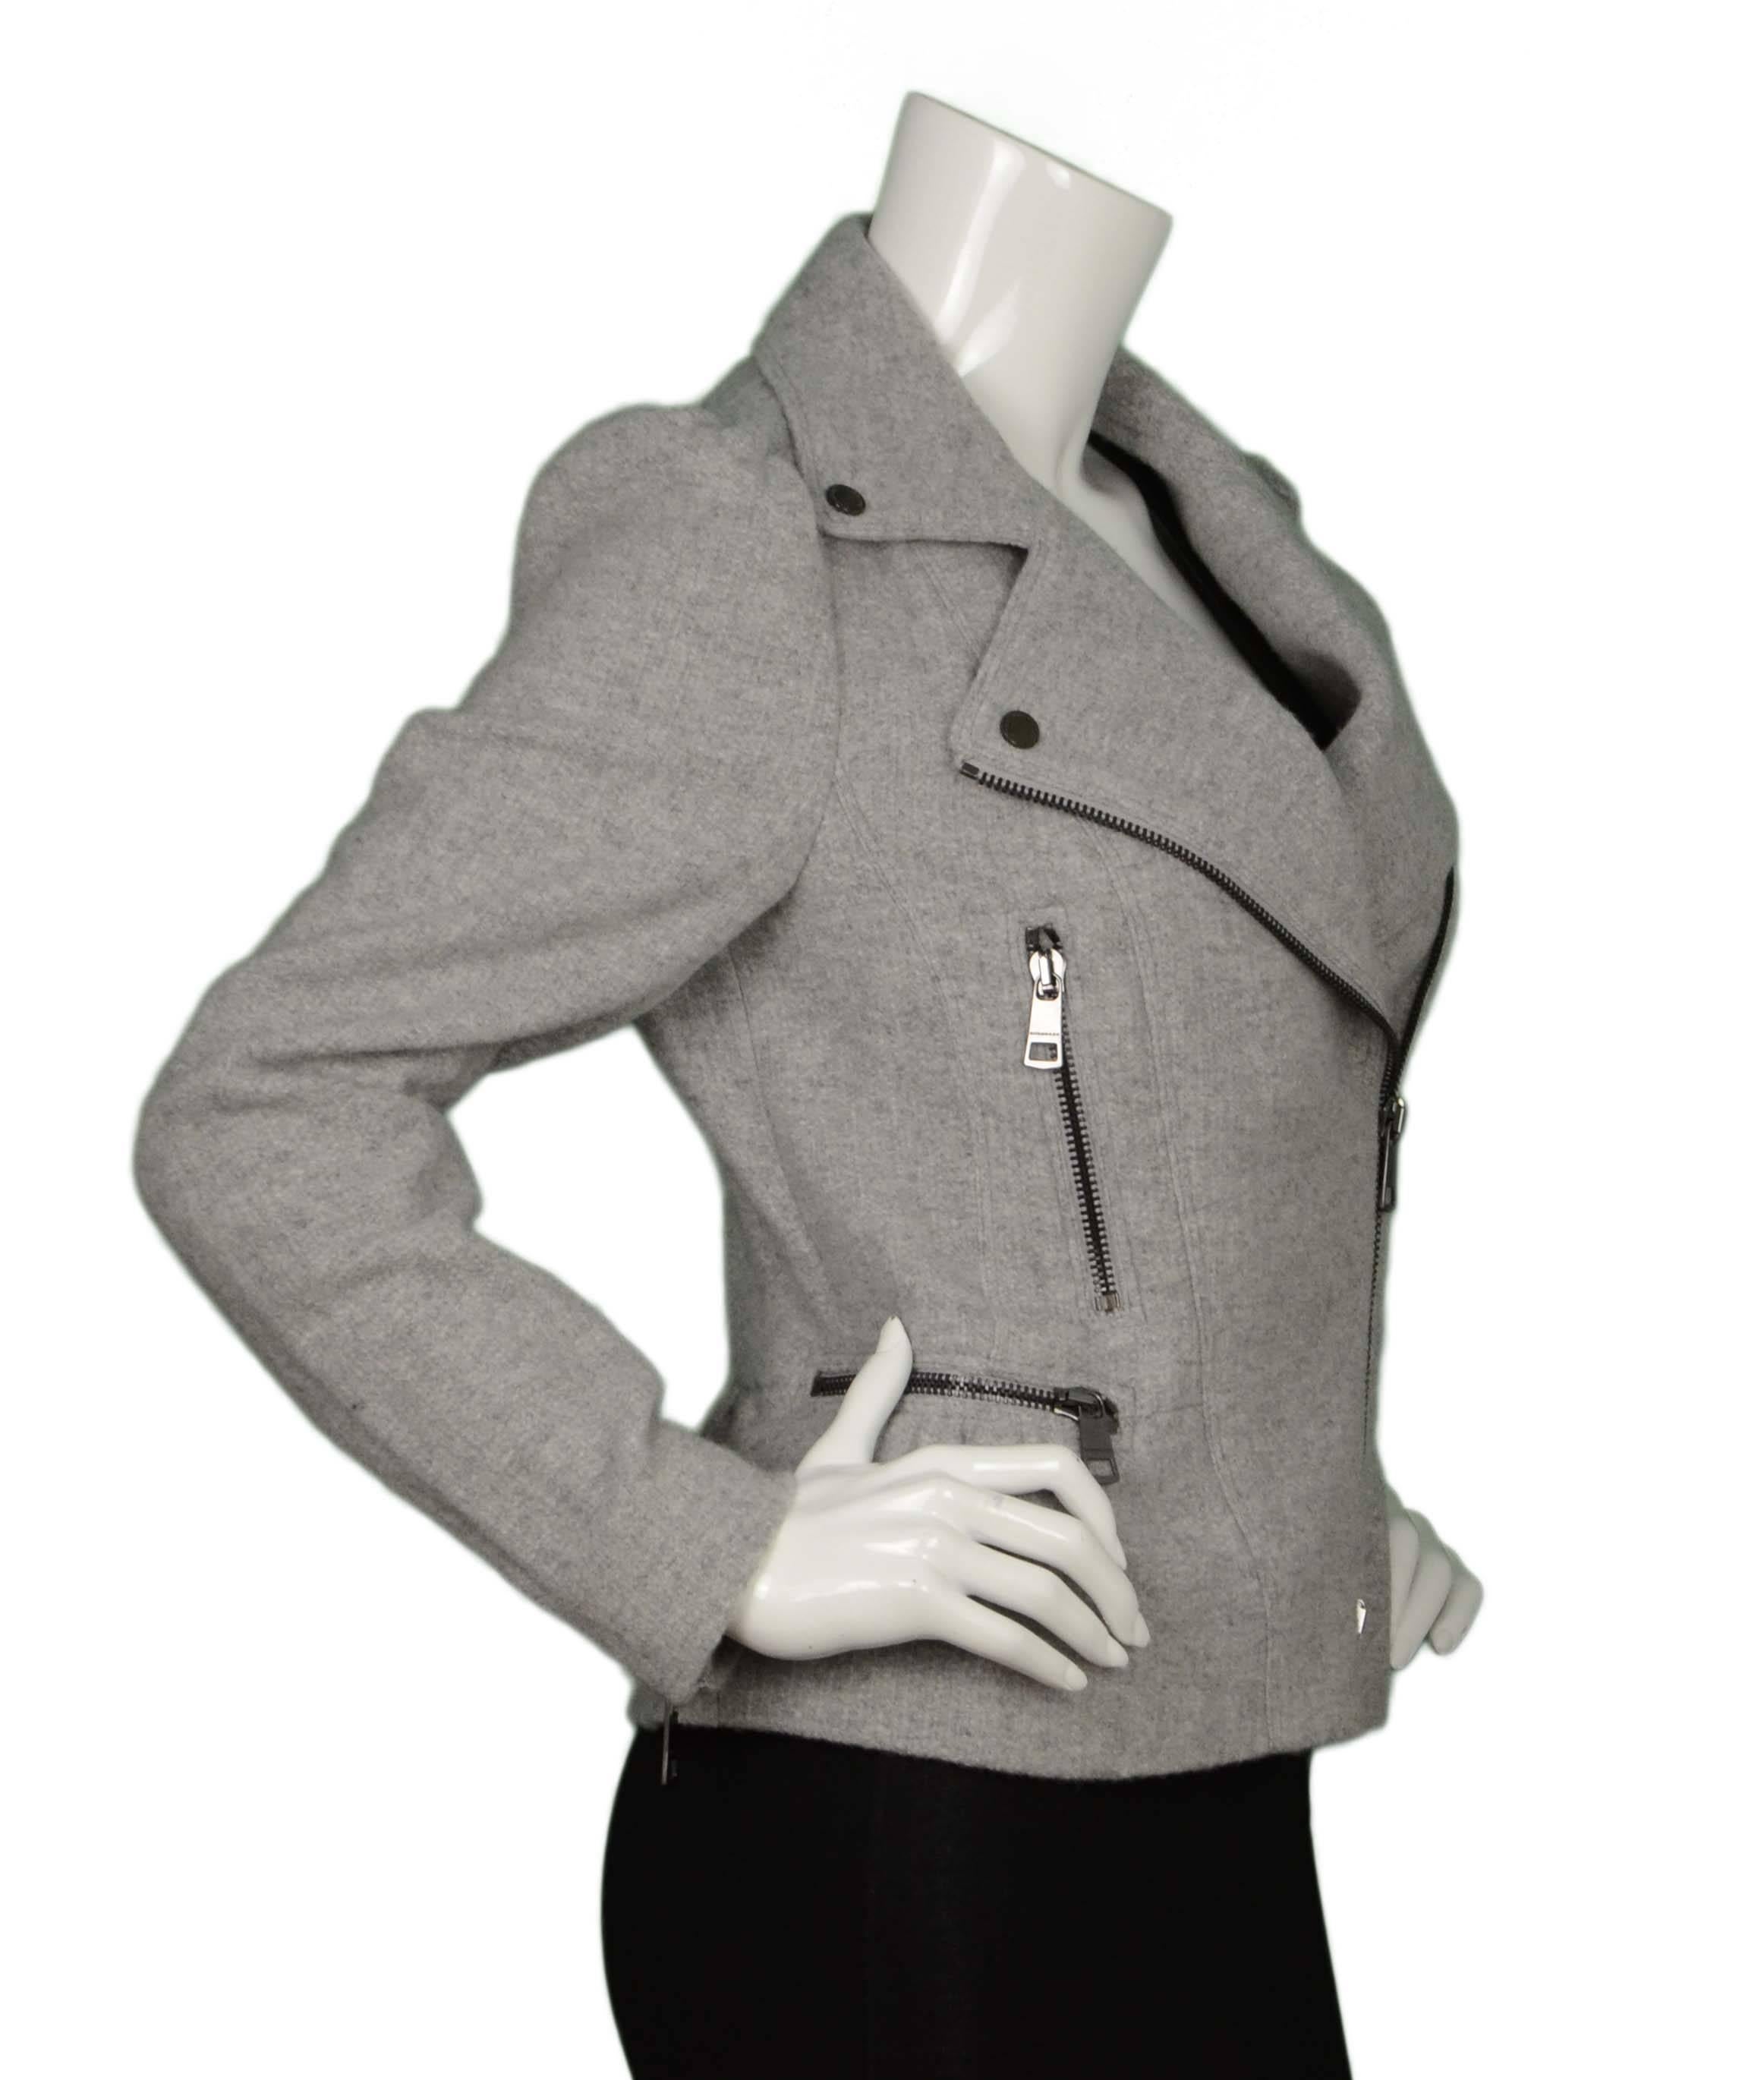 Burberry Grey Wool Peplum Moto Jacket 
Features puffed shoulders and peplum botton
Made In: Poland
Color: Light grey
Composition: Believed to be 100% wool
Lining: None
Closure/Opening: Front asymmetrical zip up with top snaps
Exterior